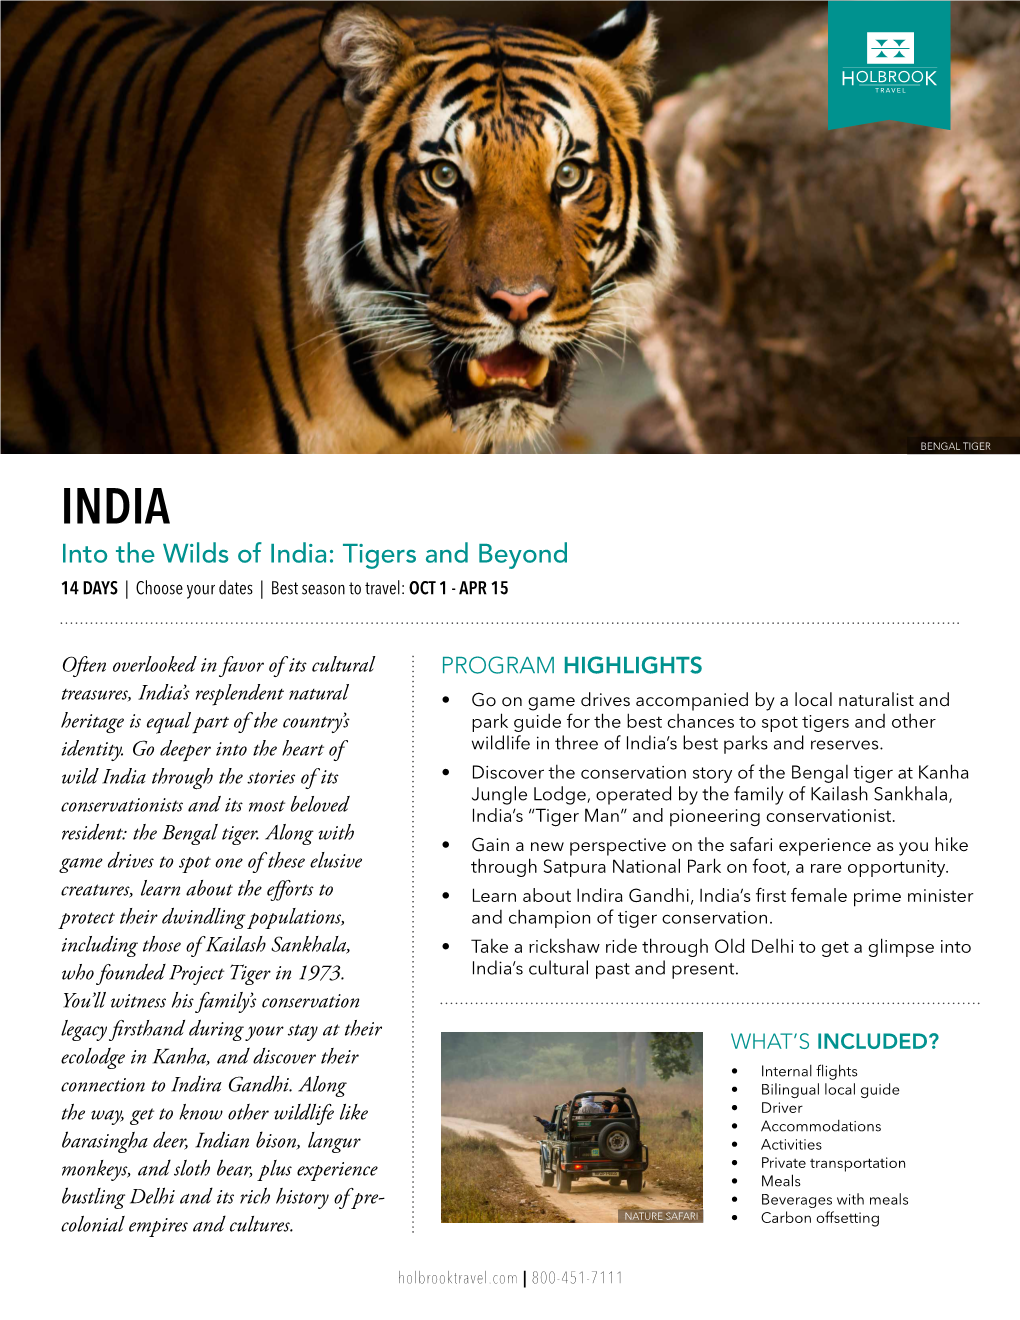 Into the Wilds of India: Tigers and Beyond 14 DAYS | Choose Your Dates | Best Season to Travel: OCT 1 - APR 15